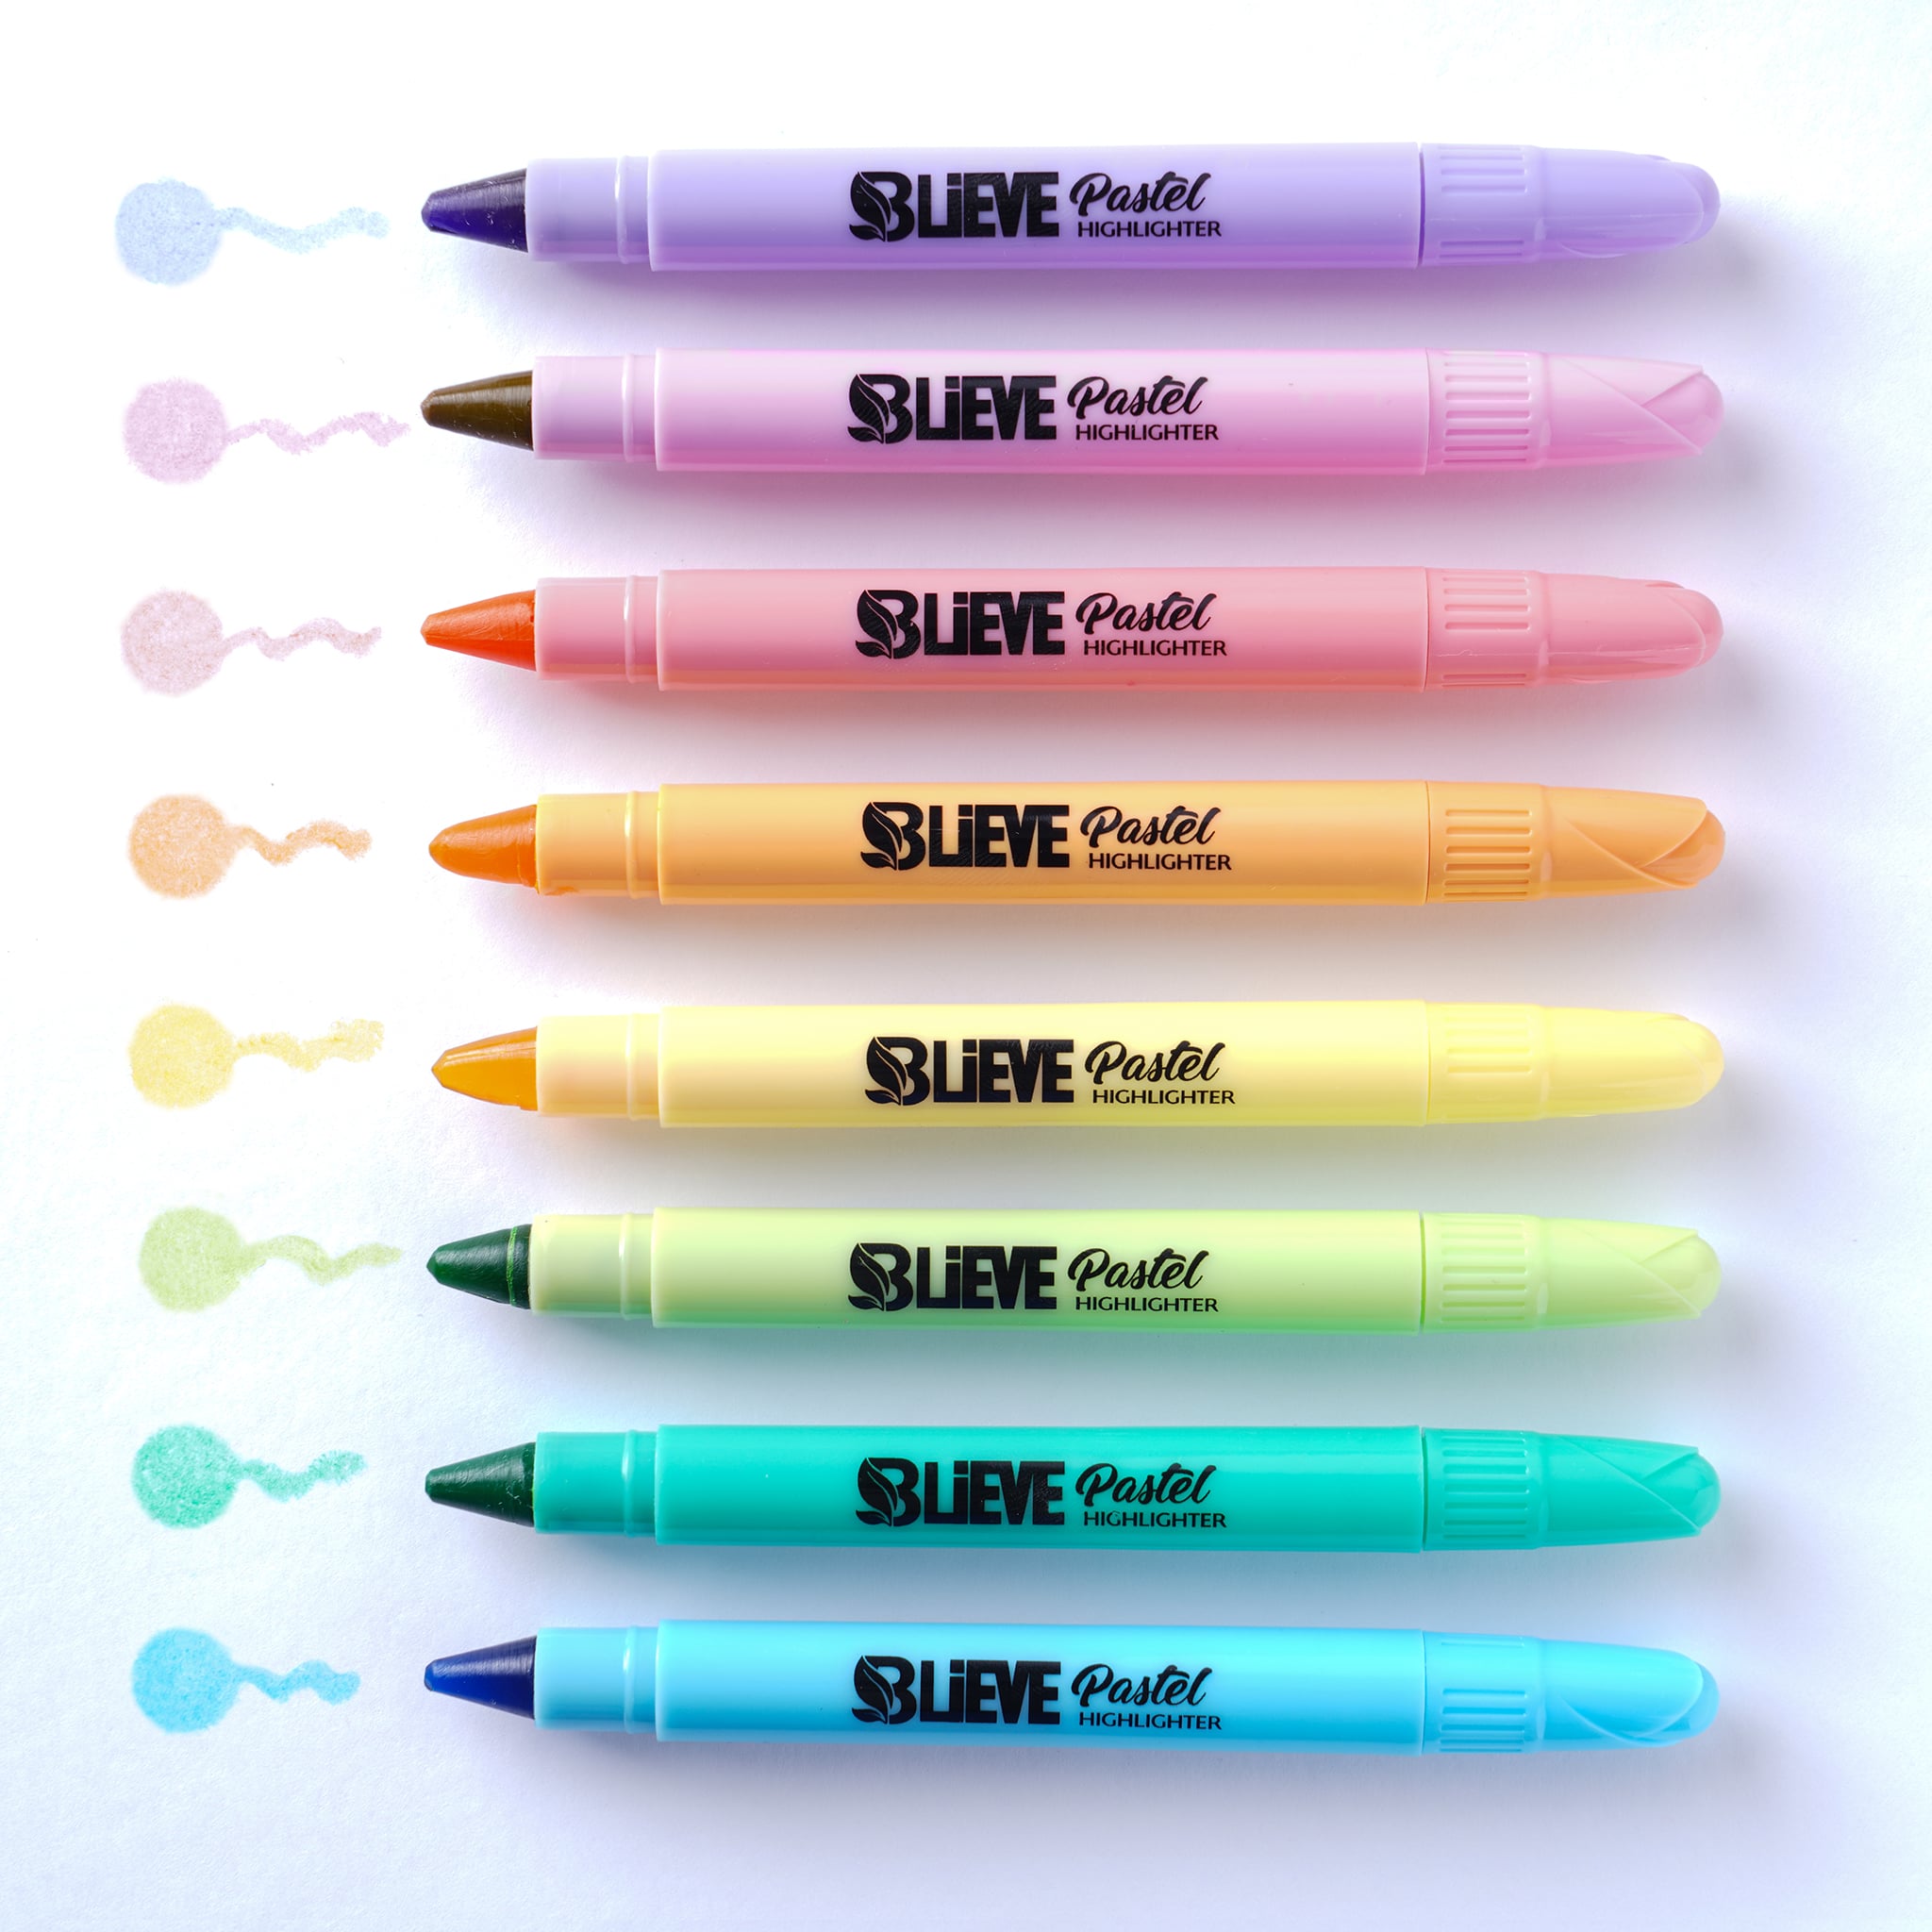 BLIEVE- Bible Highlighter Pack of 8, Gel Highlighters for Bibles,  Highlighter Pens, Bible Journaling Supplies, Highlighters For Bible Pages, Bible  Highlighters No Bleed, Bible Markers (Vib 